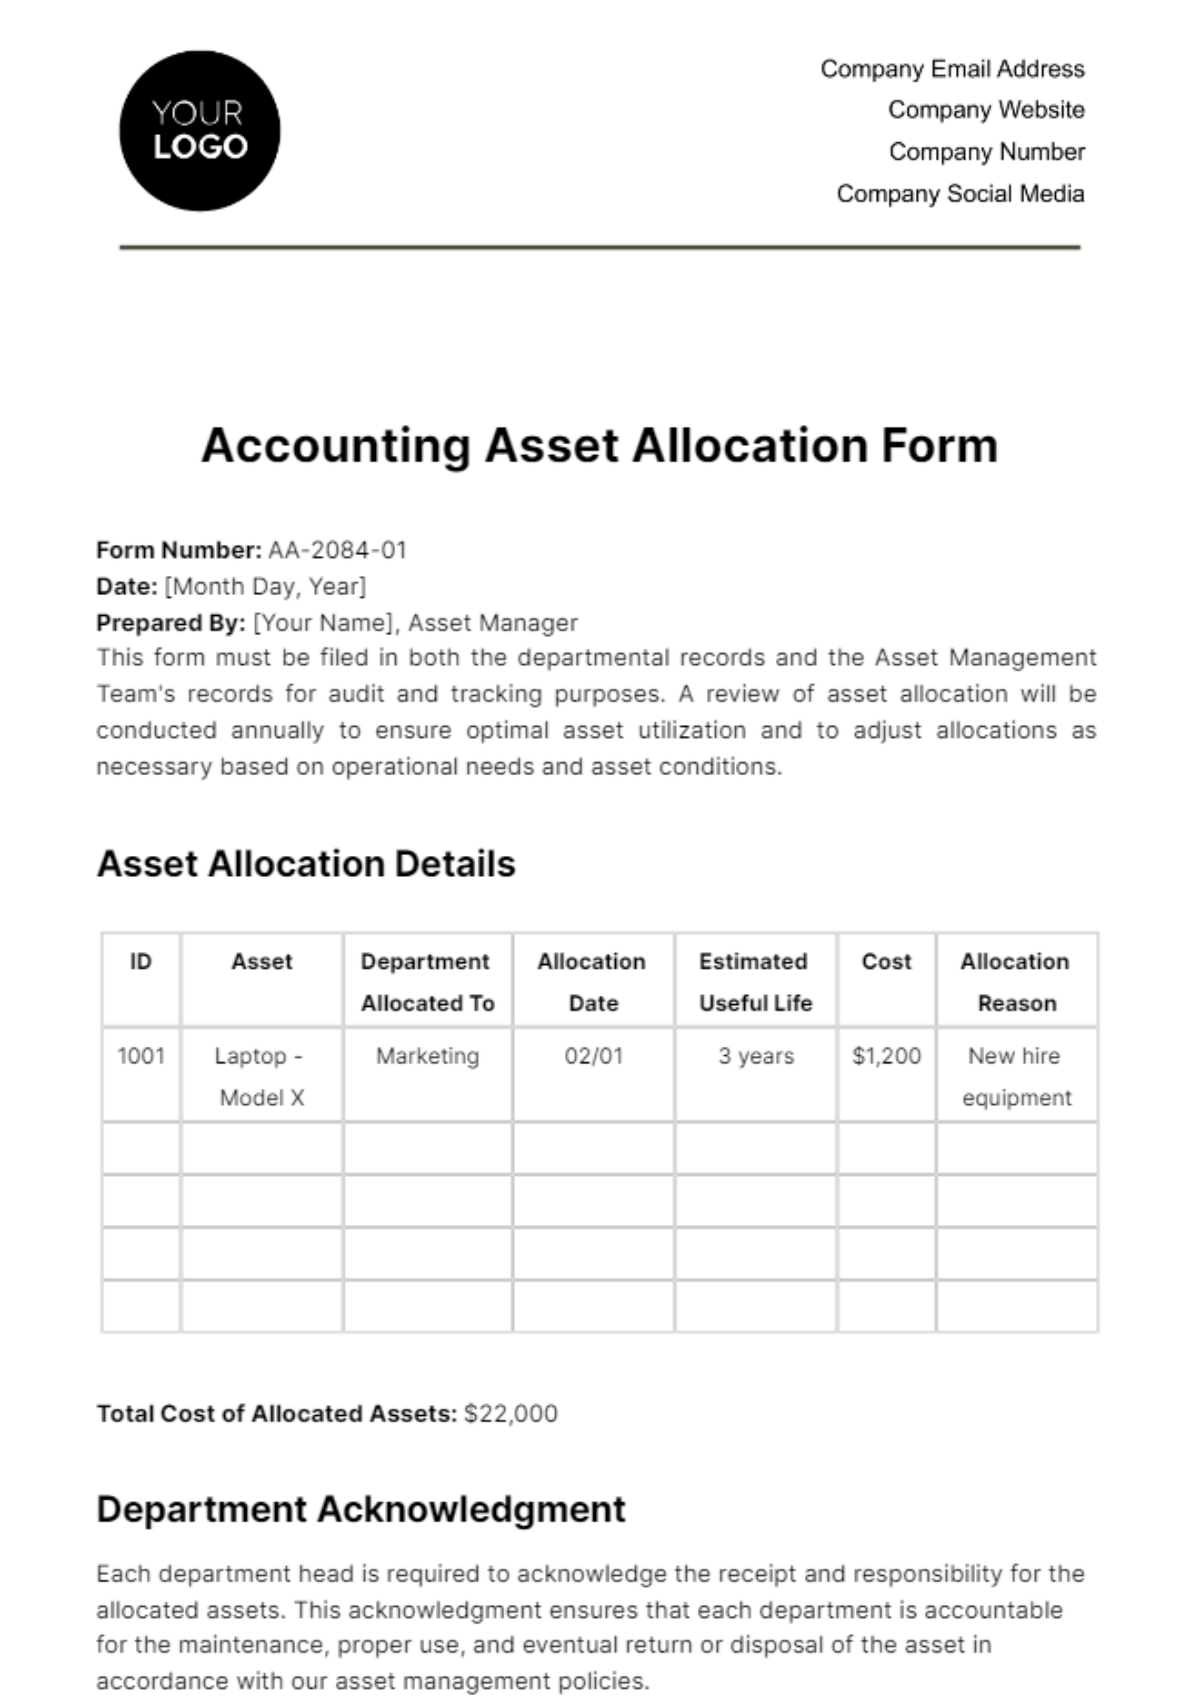 Free Accounting Asset Allocation Form Template